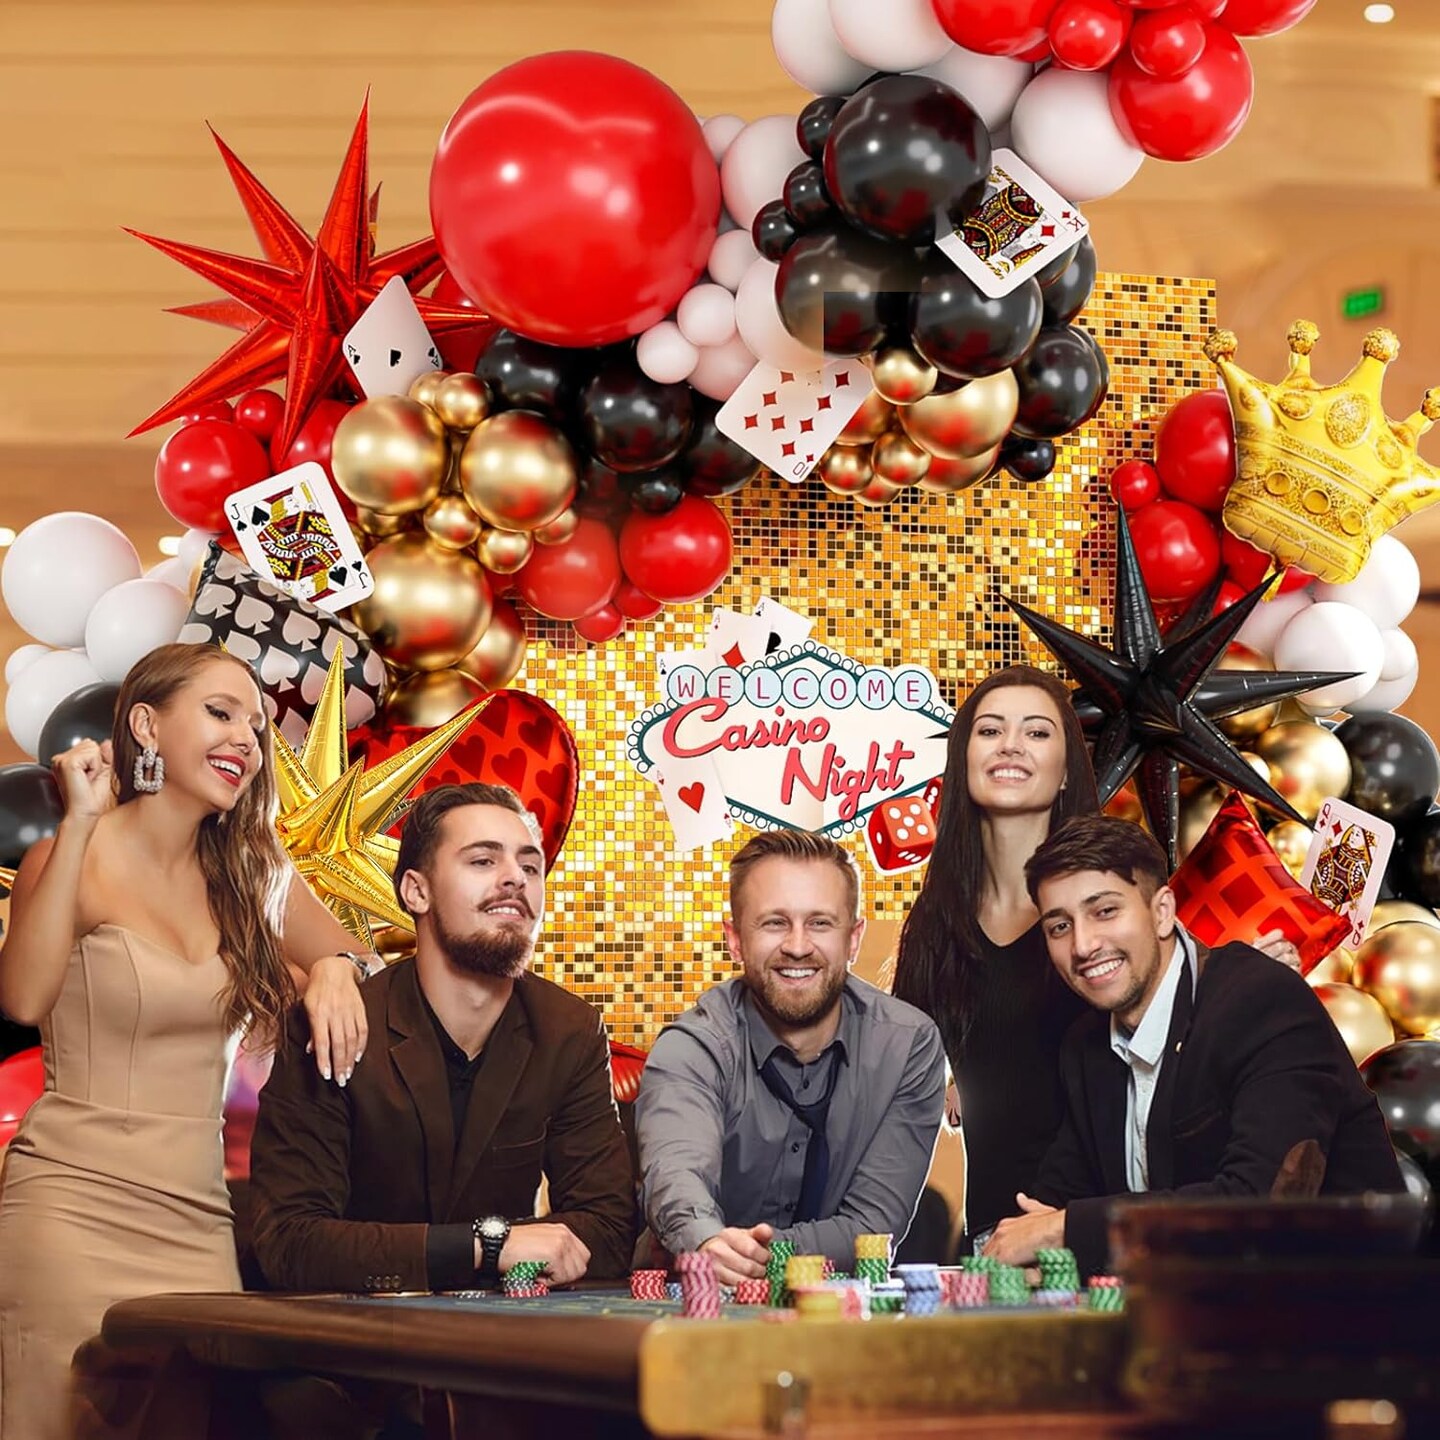 165pcs Casino Balloon Arch Garland Kit, Red Black Gold Balloons with Starburst Crown Dice Poker Foil Balloons for Birthday Casino Night Las Vegas Casino Theme Party Decorations